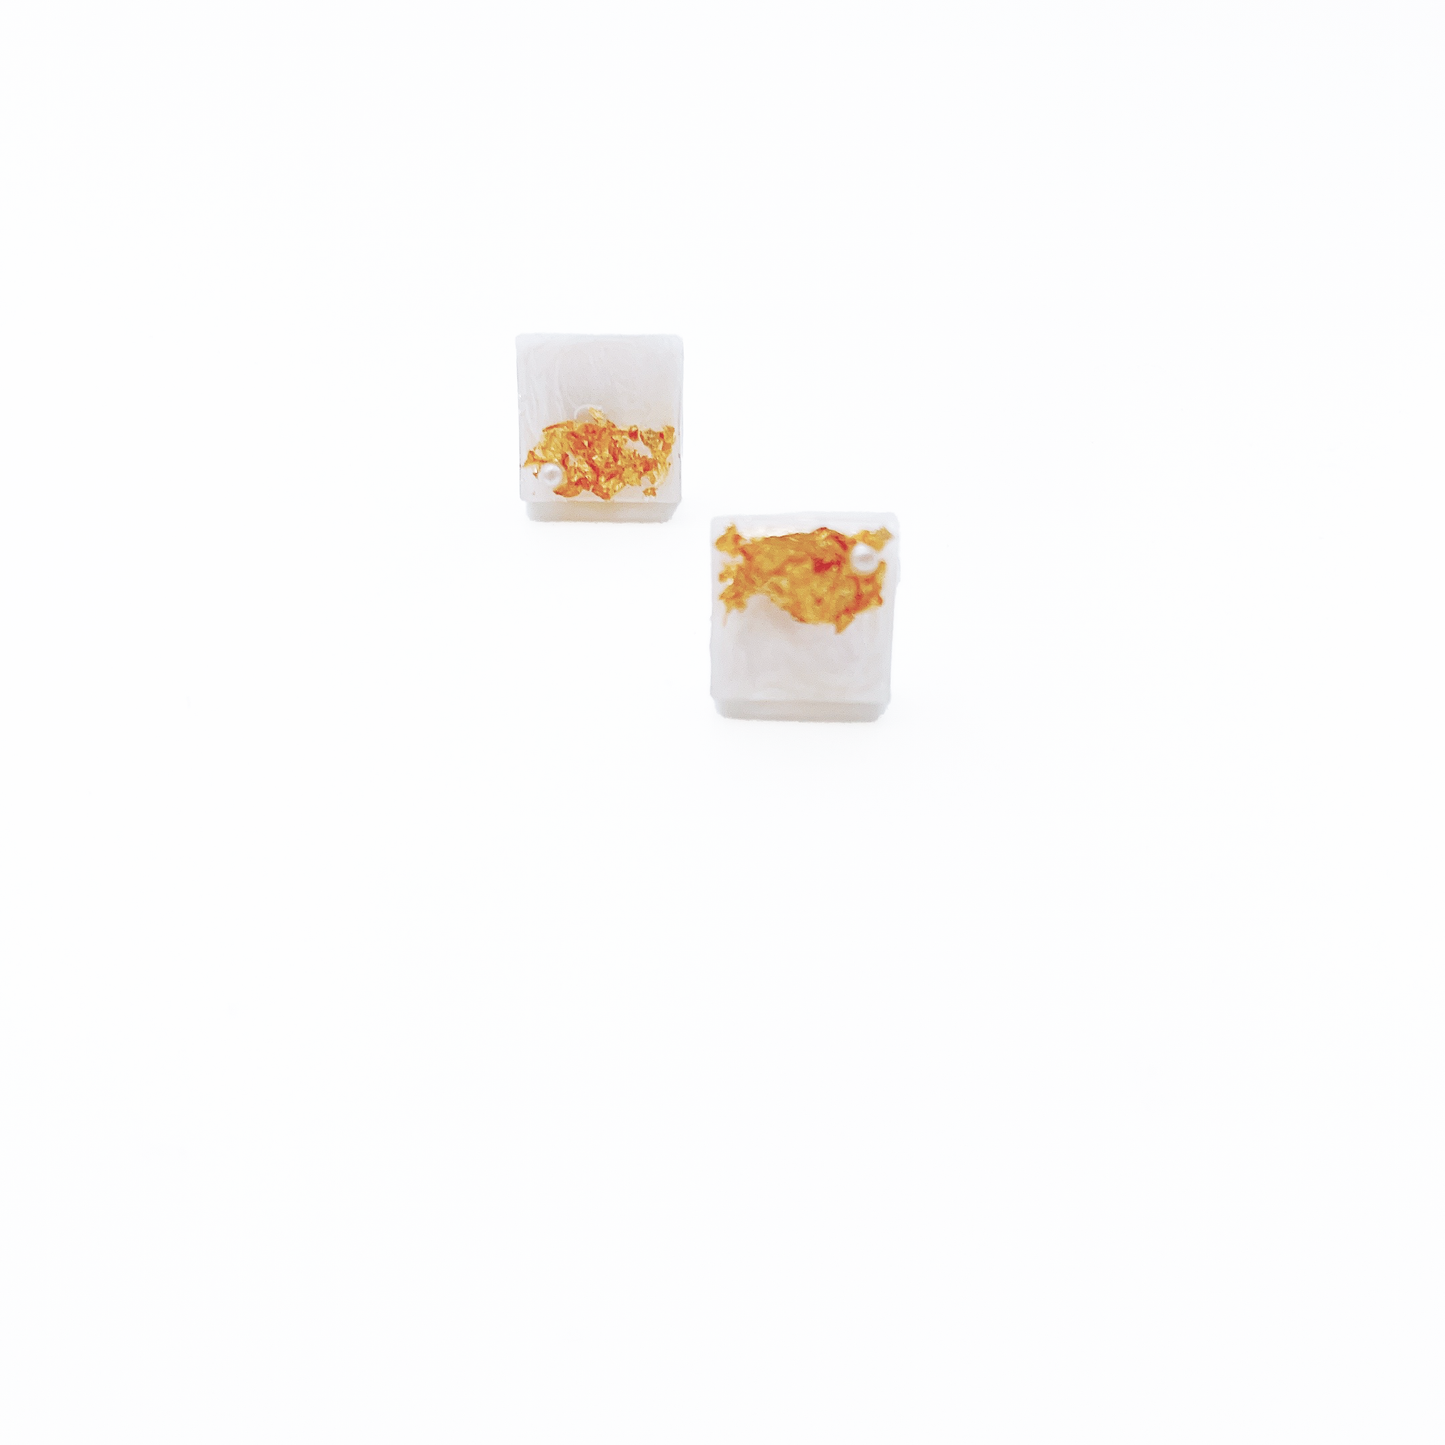 Japanese square resin earring, 14k gold filled by Hikaru Pearl